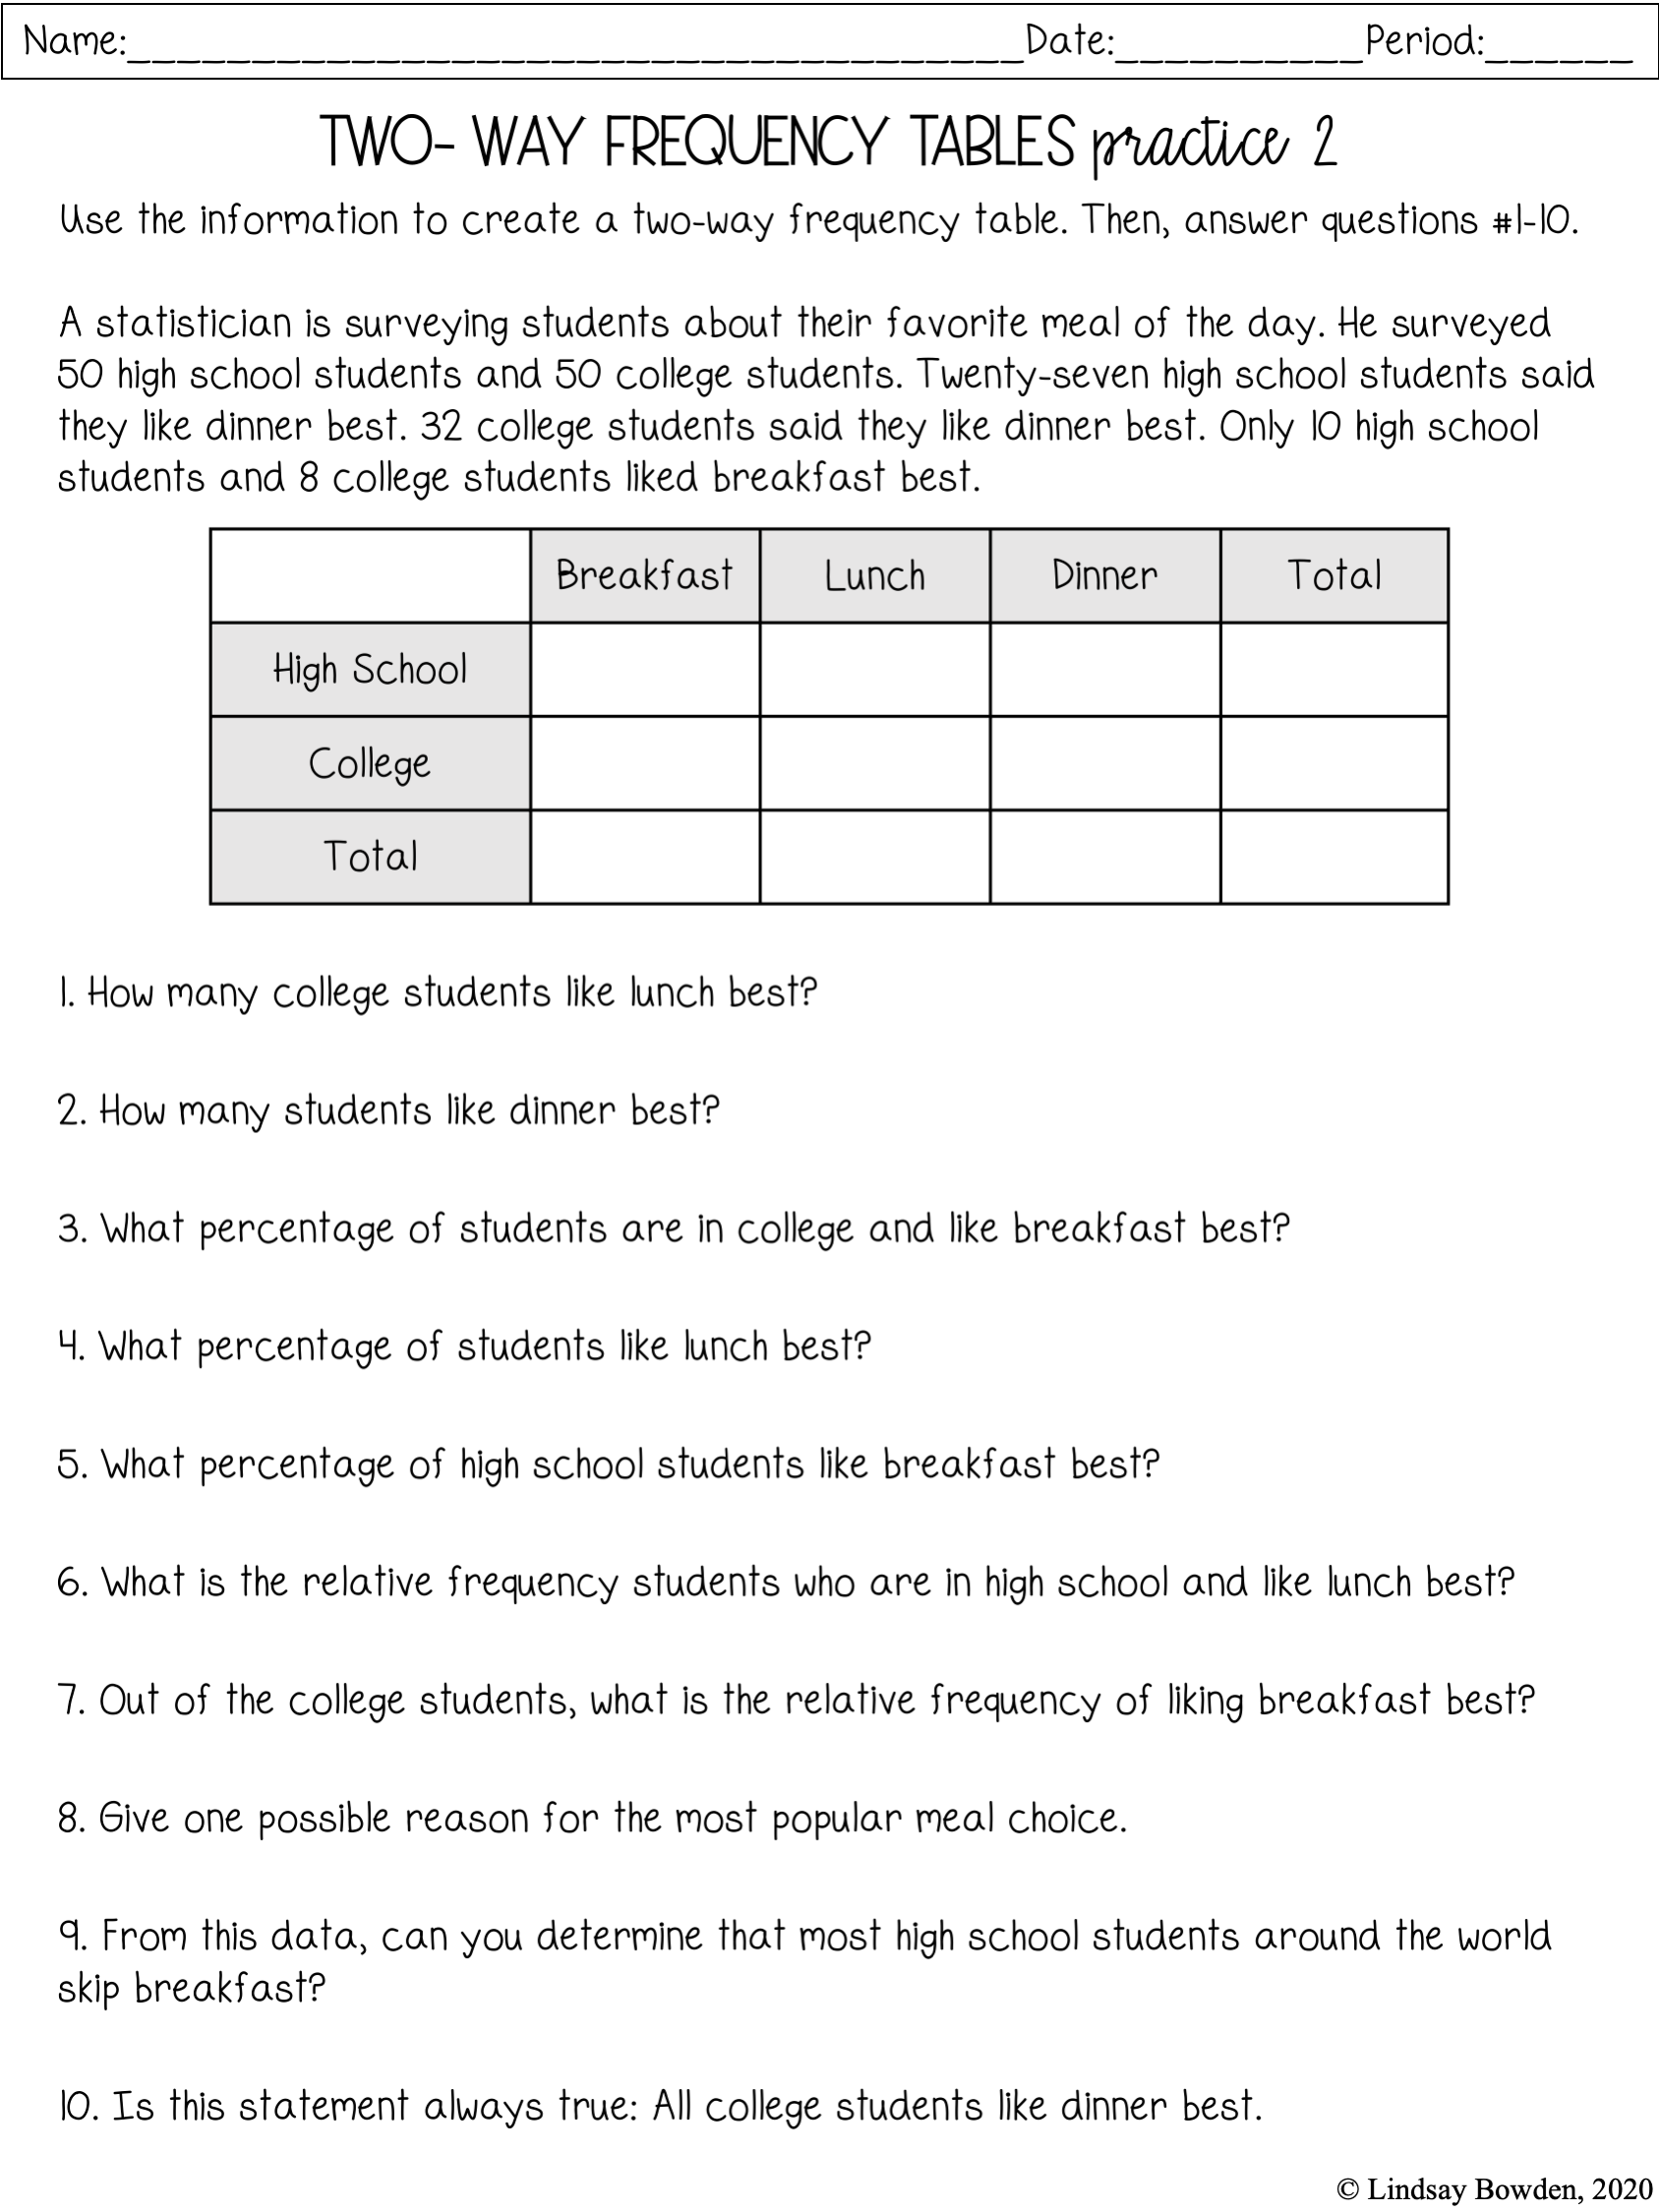 Two Way Tables Worksheet